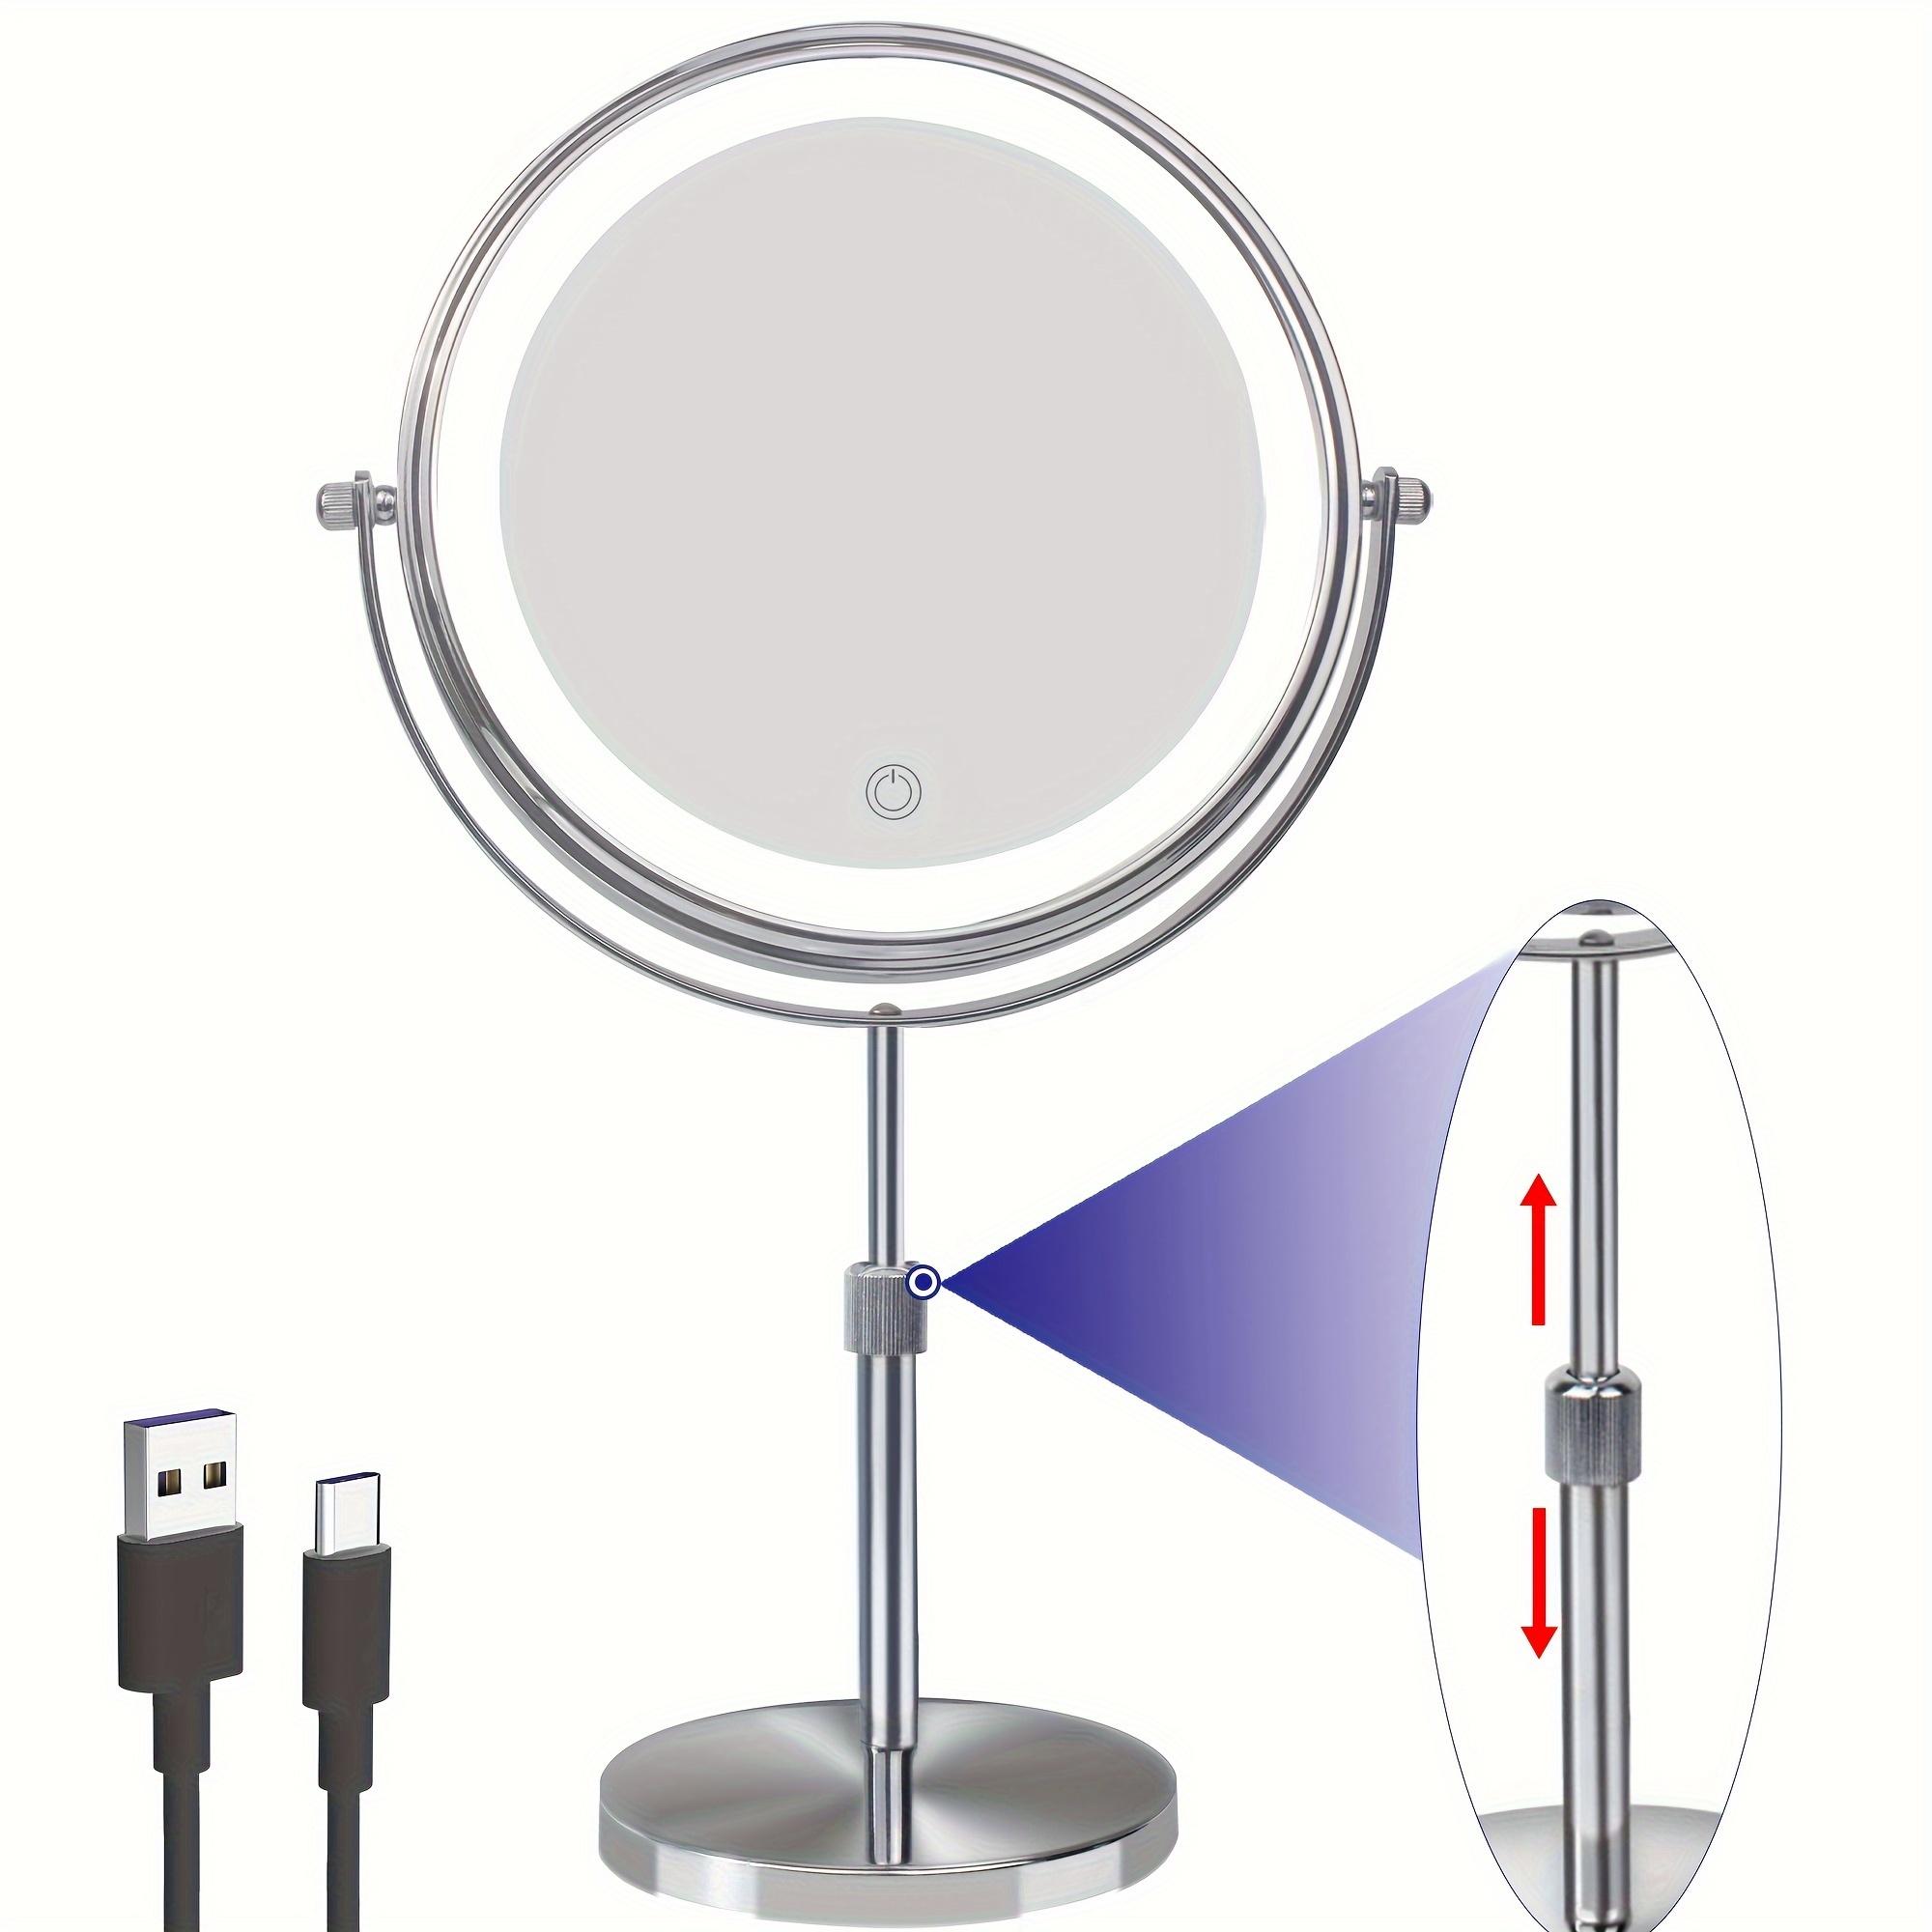 

8" Lighted Makeup Mirror With Magnification, 3 Light Colors, Adjustable Brightness & Height, 360° Rotation, 10x Magnifying Mirror With Light, Led Vanity Mirror For Women - Chrome